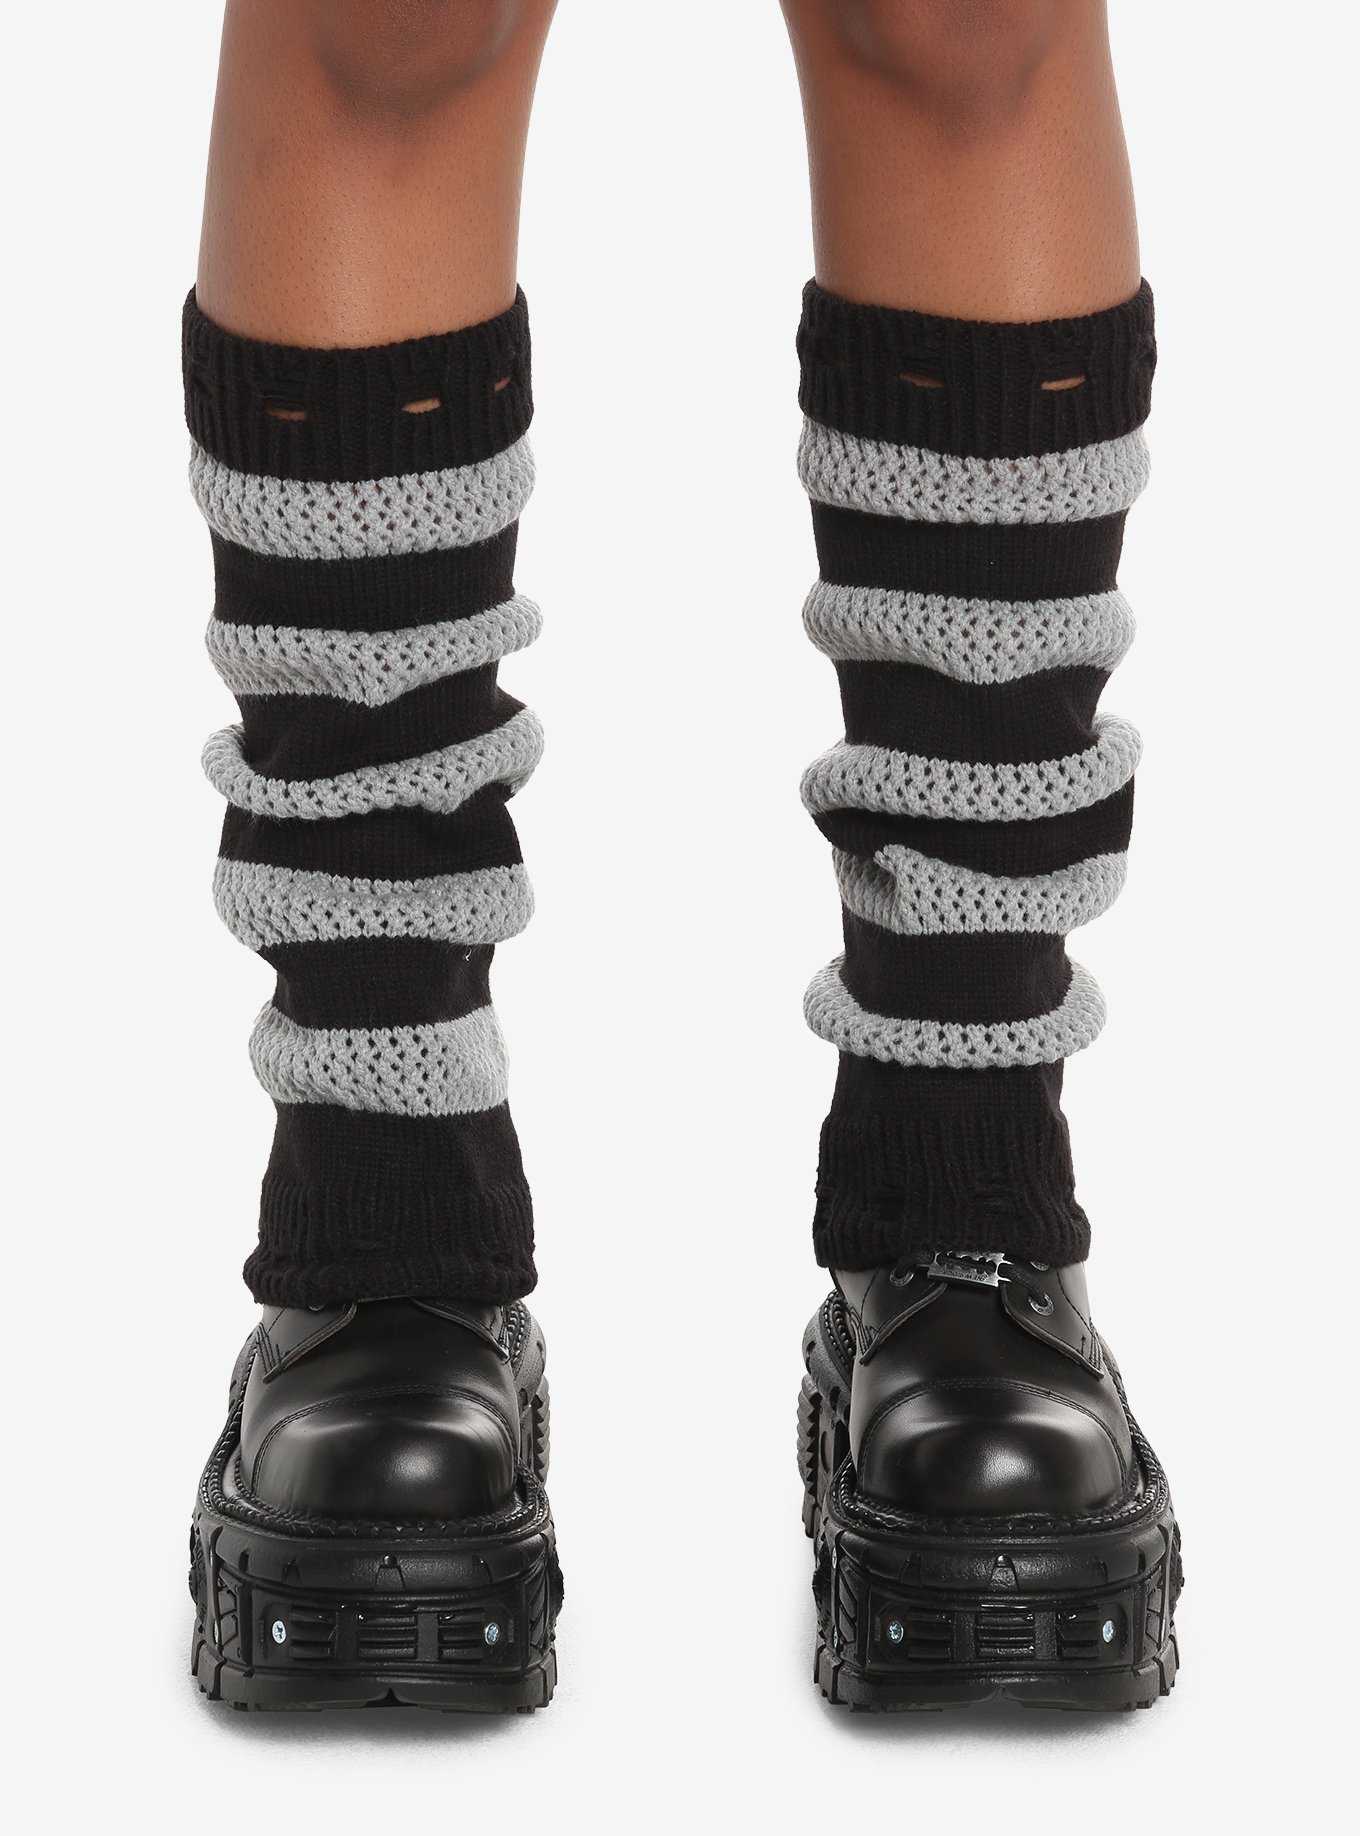 Cozy Outing Waffle Knit Leg Warmers In Black • Impressions Online Boutique